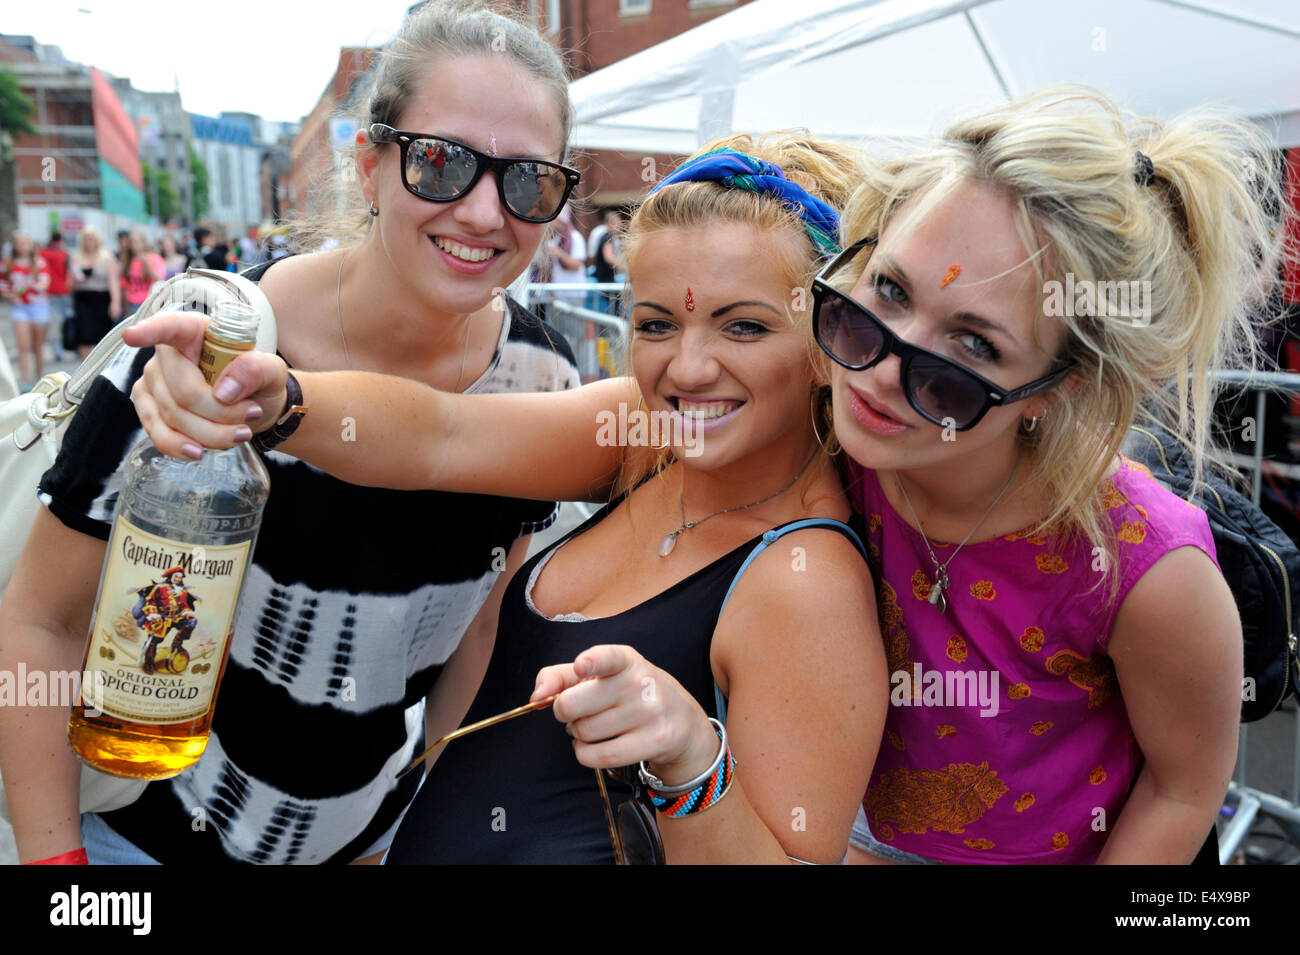 Three young women at street festival Stock Photo